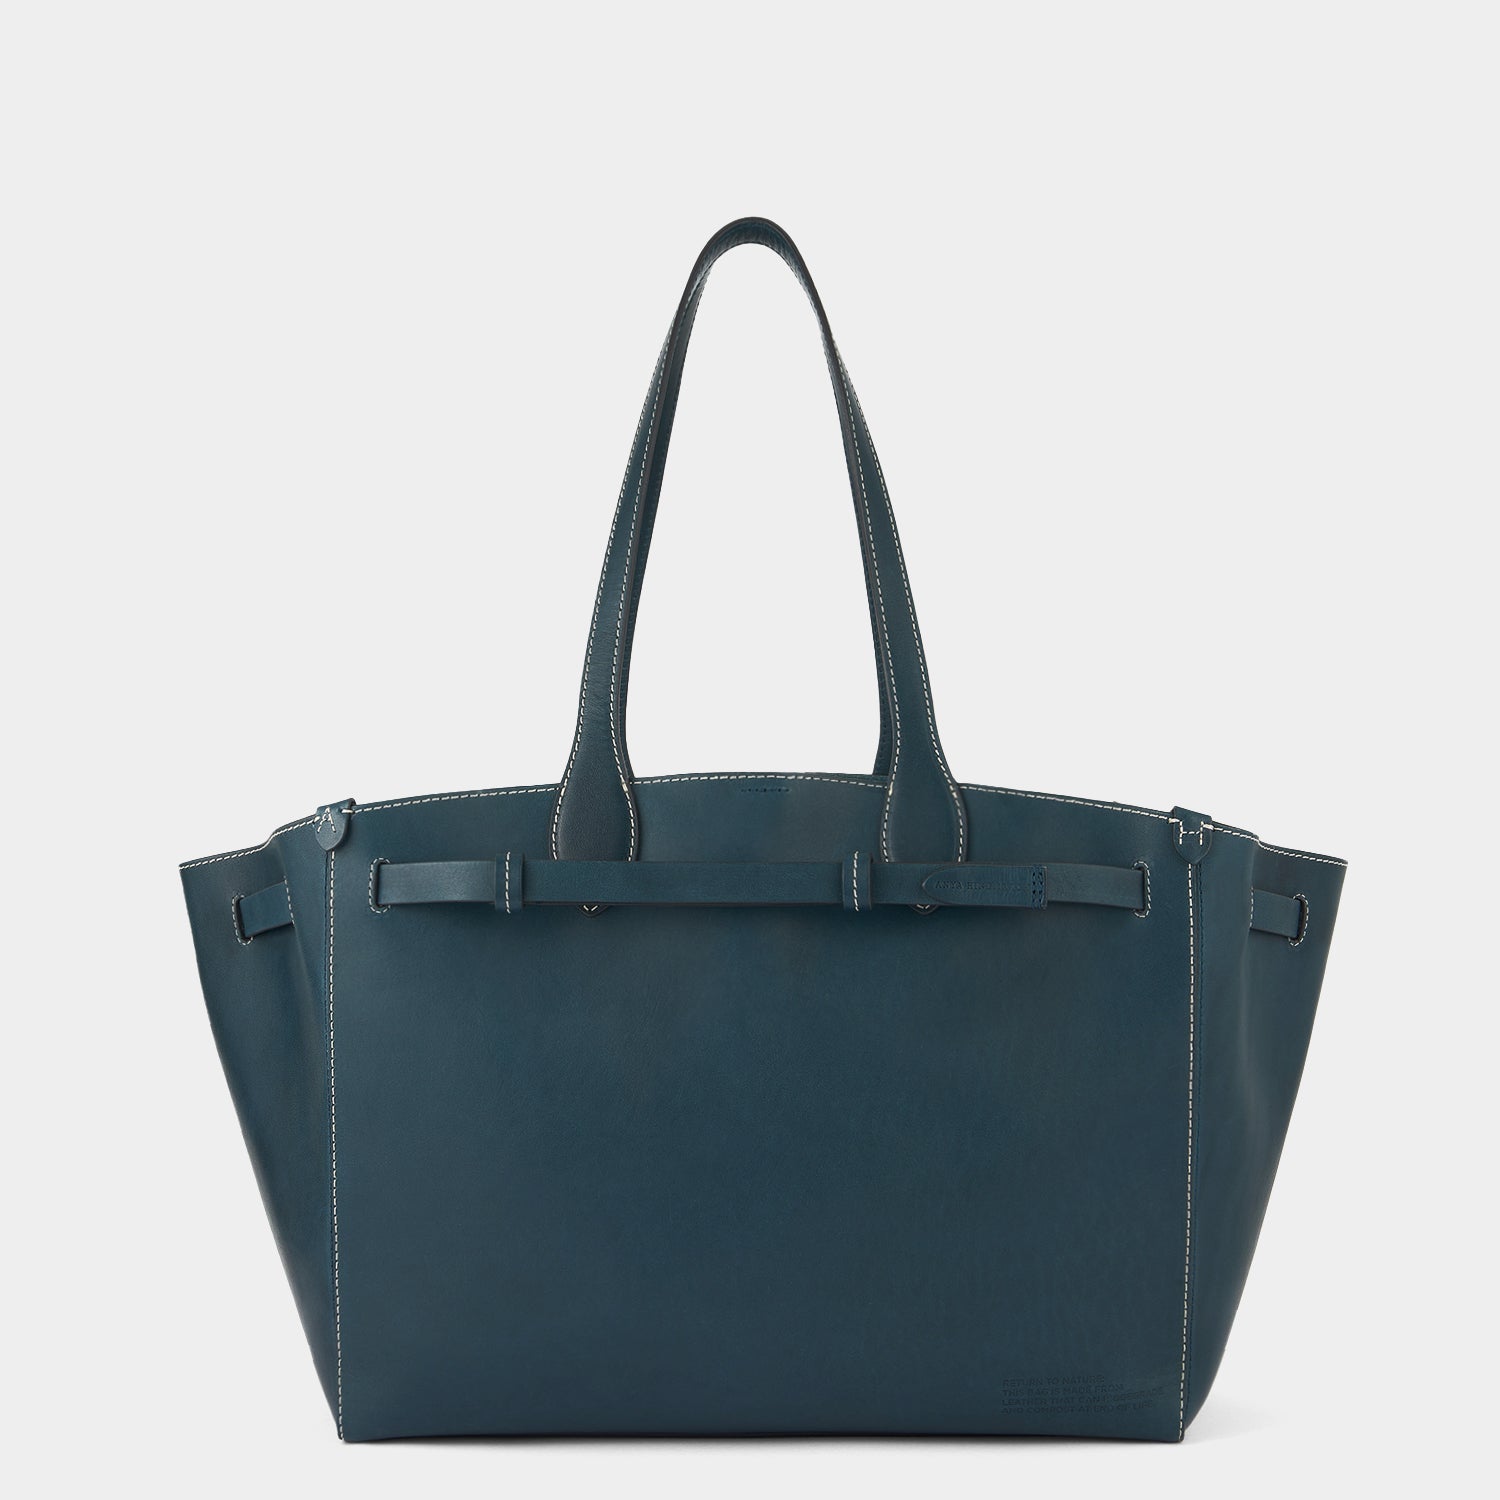 Return to Nature Tote -

                  
                    Compostable Leather in Dark Holly -
                  

                  Anya Hindmarch US
